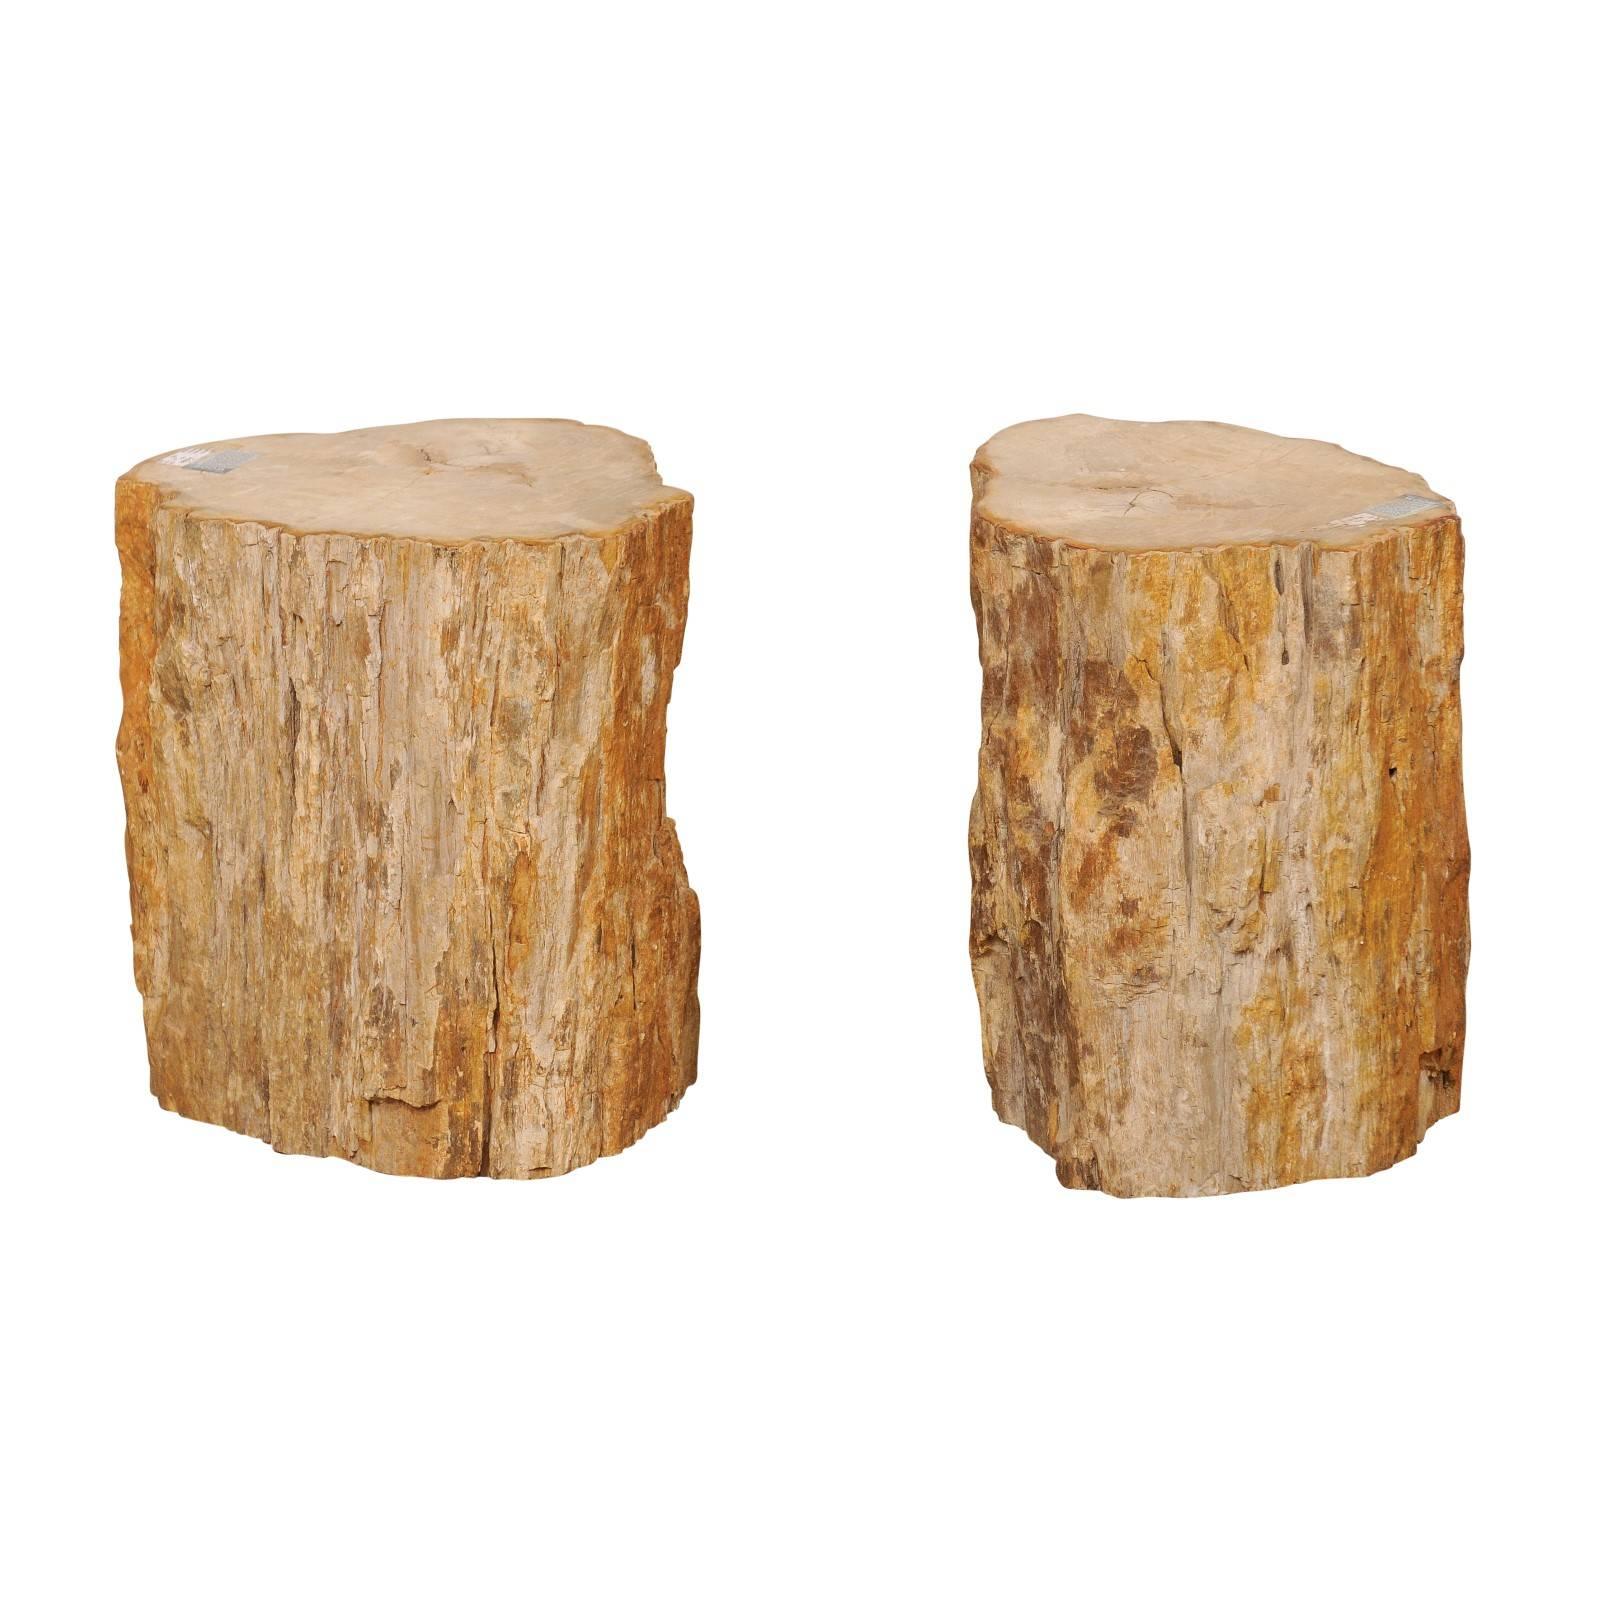 Pair of Beige, Brown and Cream Polished Petrified Wood Drinks / Side Tables